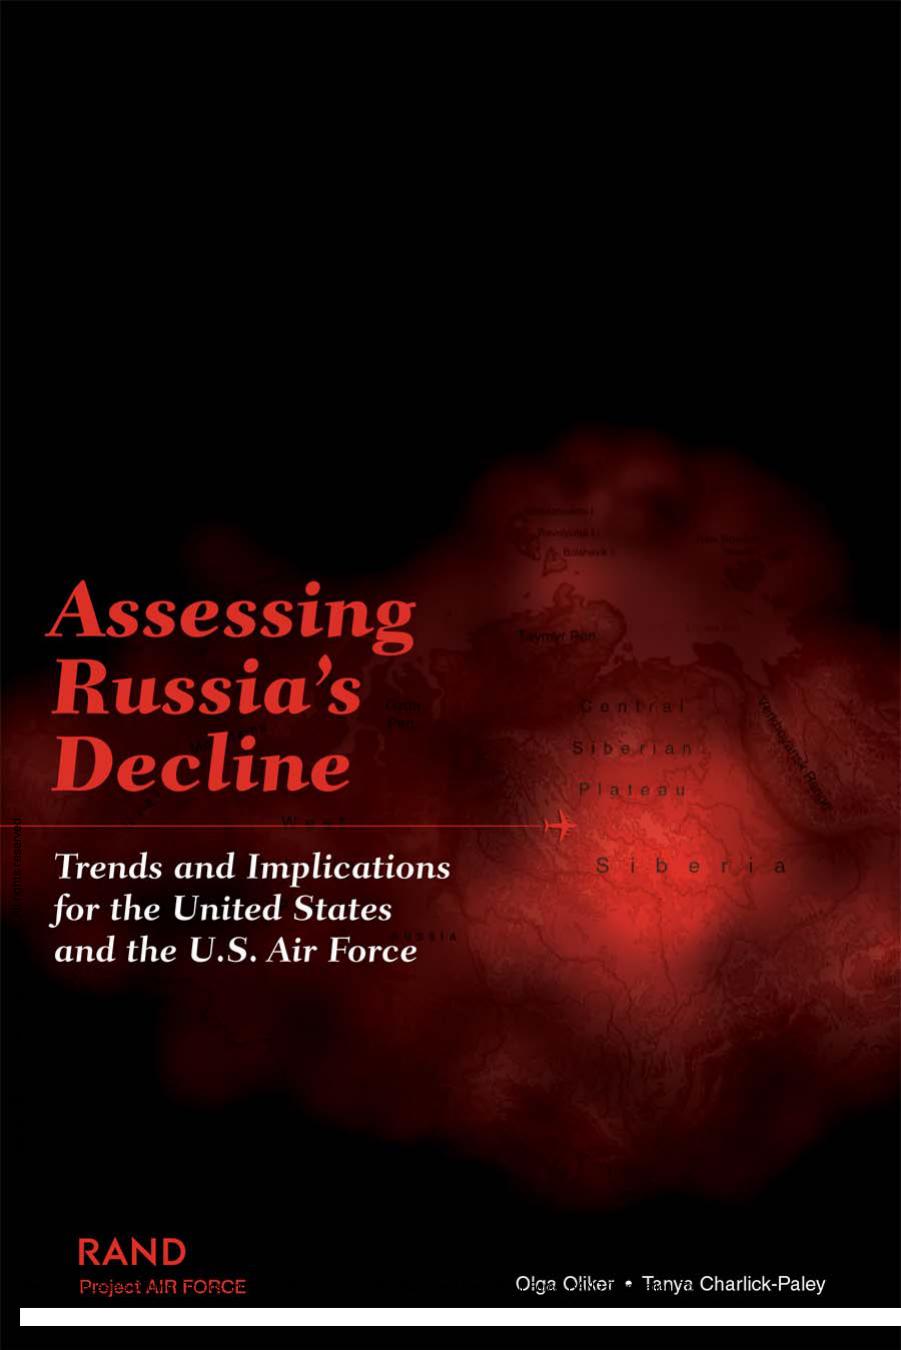 Assessing Russia's Decline : Trends and Implications for the United States and the U.S. Air Force by Olga Oliker; Tanya Charlick-Paley